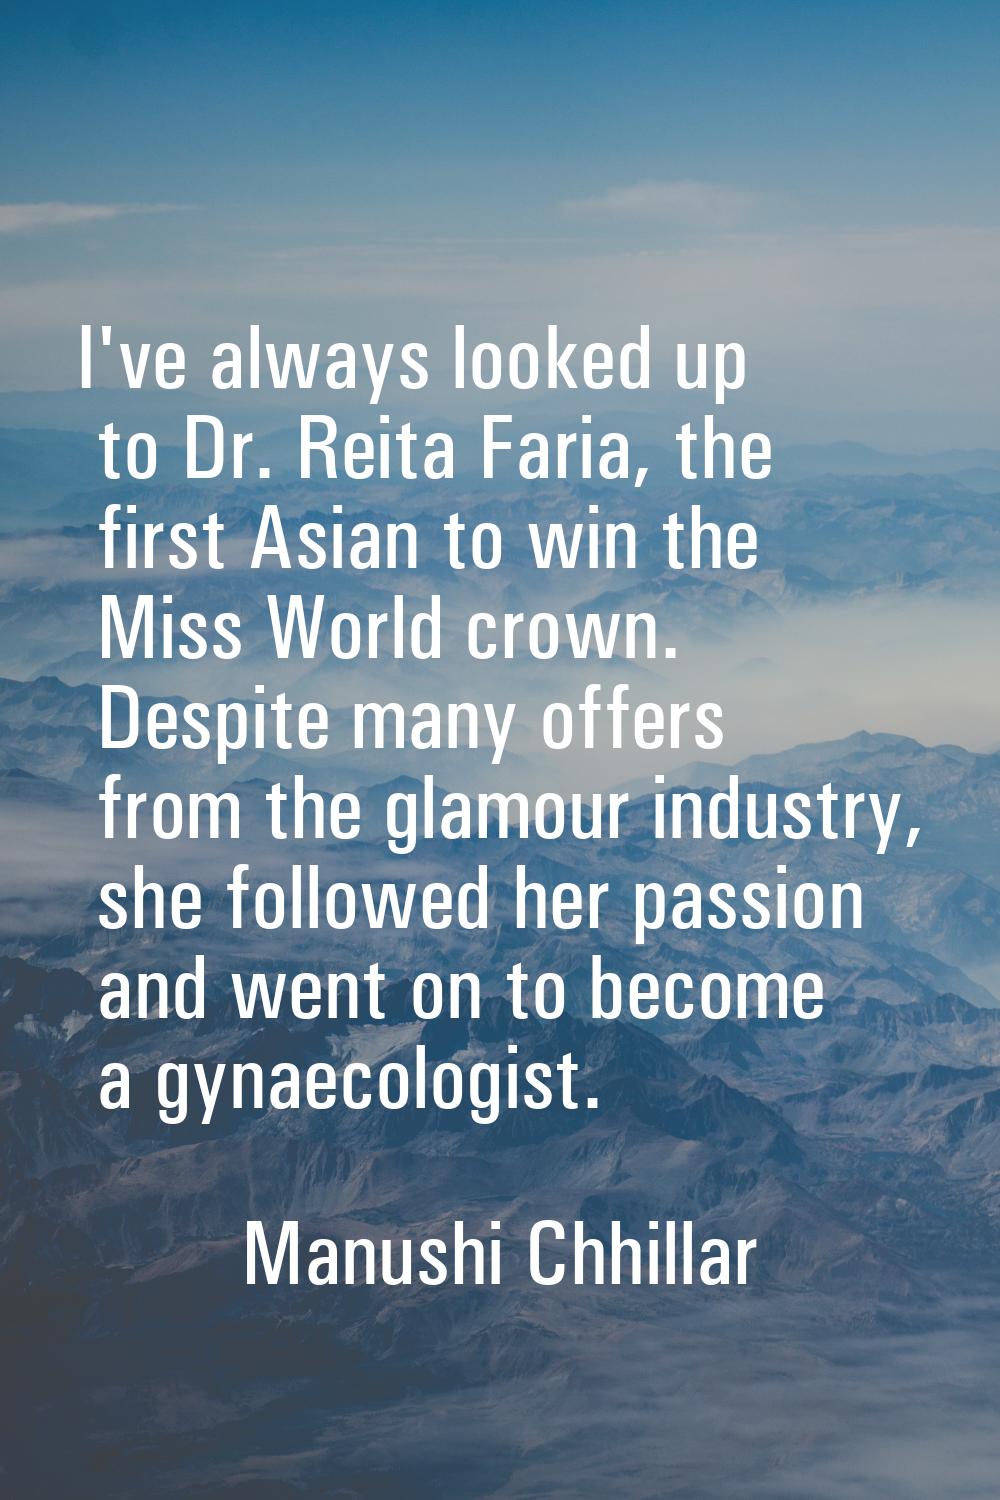 I've always looked up to Dr. Reita Faria, the first Asian to win the Miss World crown. Despite many